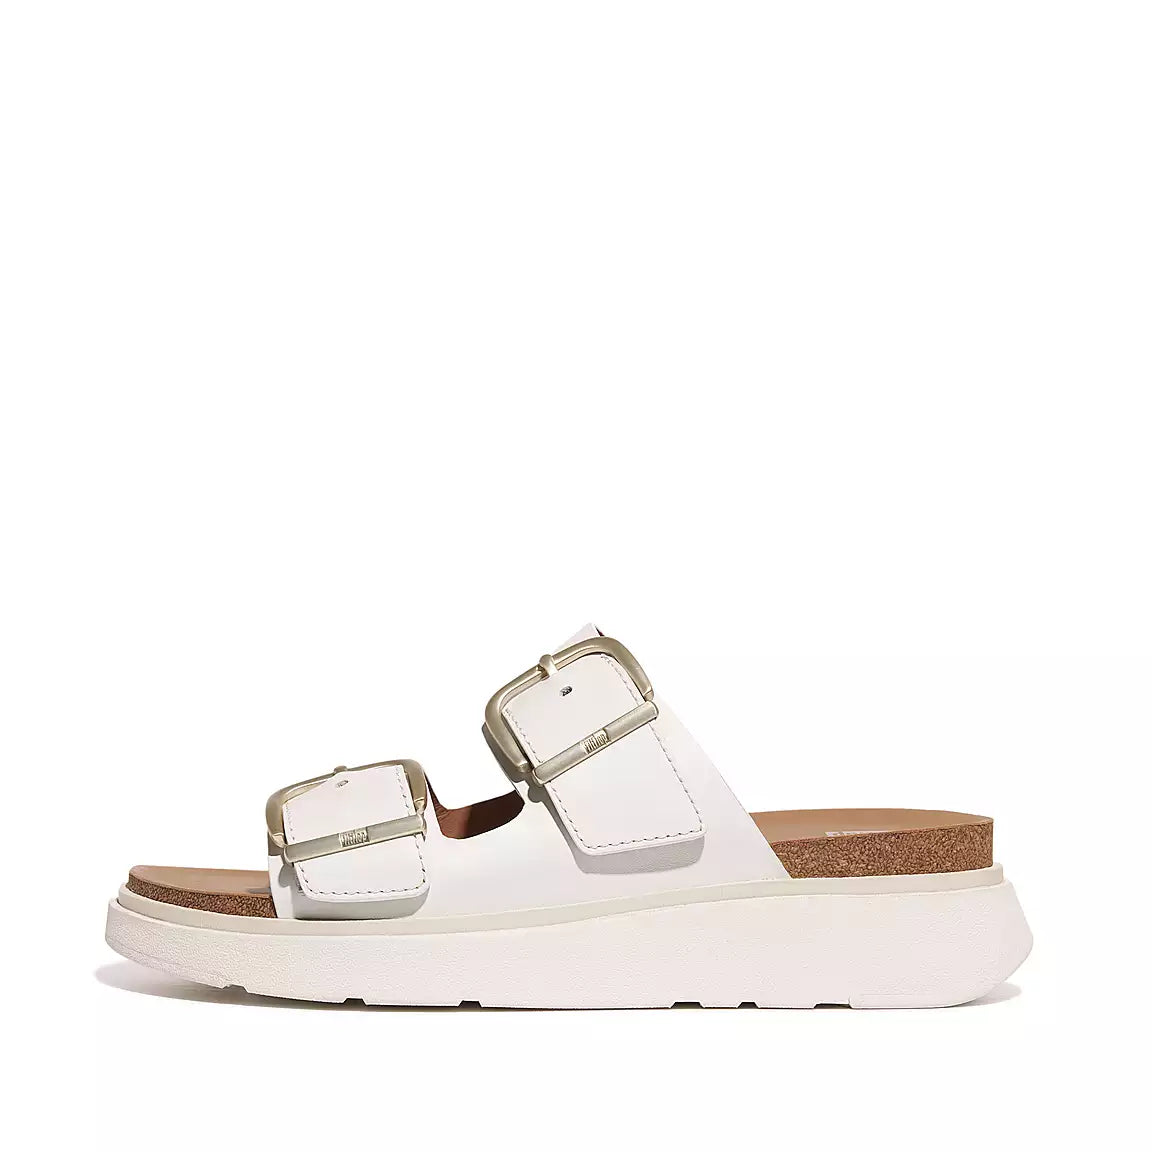 Fitflop Women’s Gen-FF Buckle Two-Bar Leather Slides Urban White